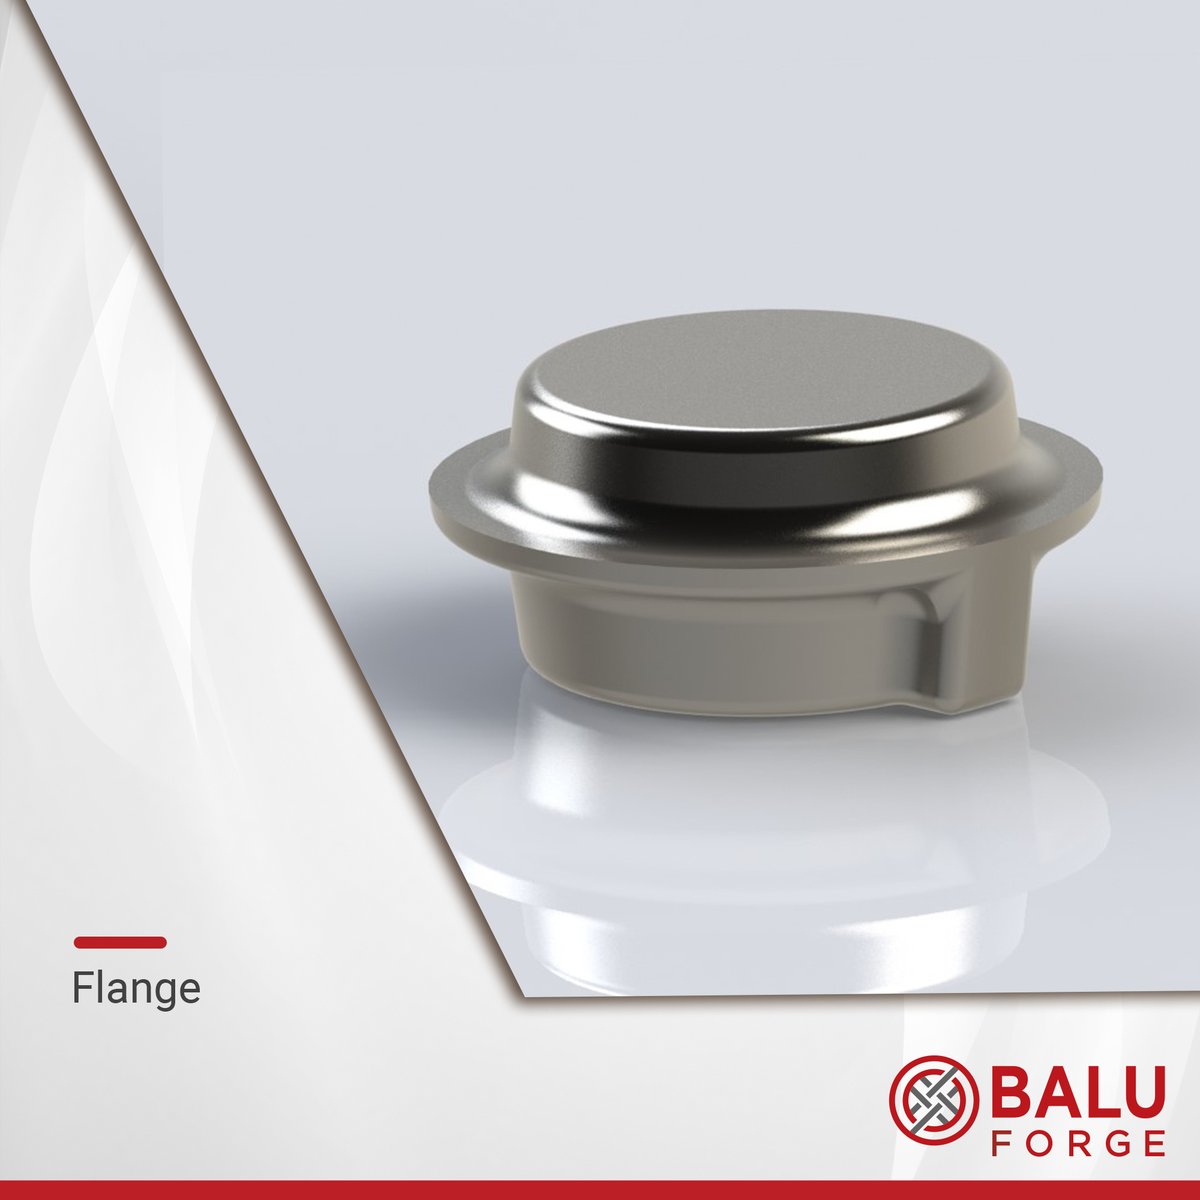 Take a look at our vast and durable defence product portfolio that helps us be a global distinguished brand.

#Balu #BaluForge #ProductPortfolio #Products #manufacturing #engineering